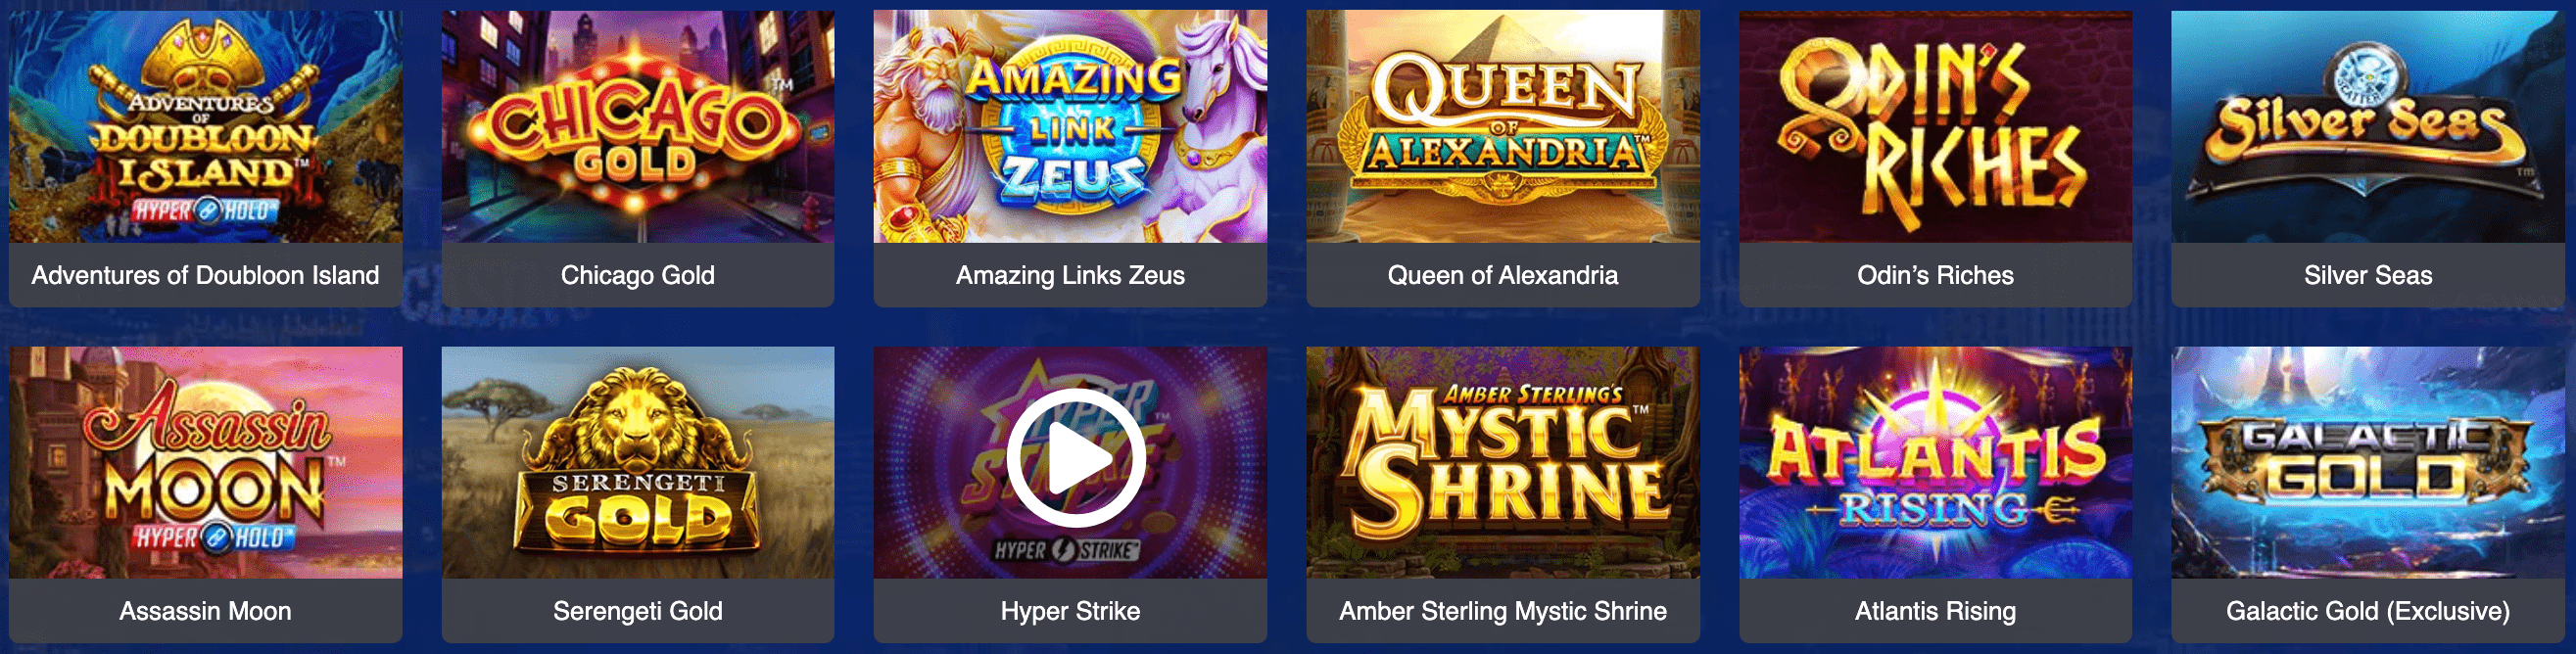 All Slots Games